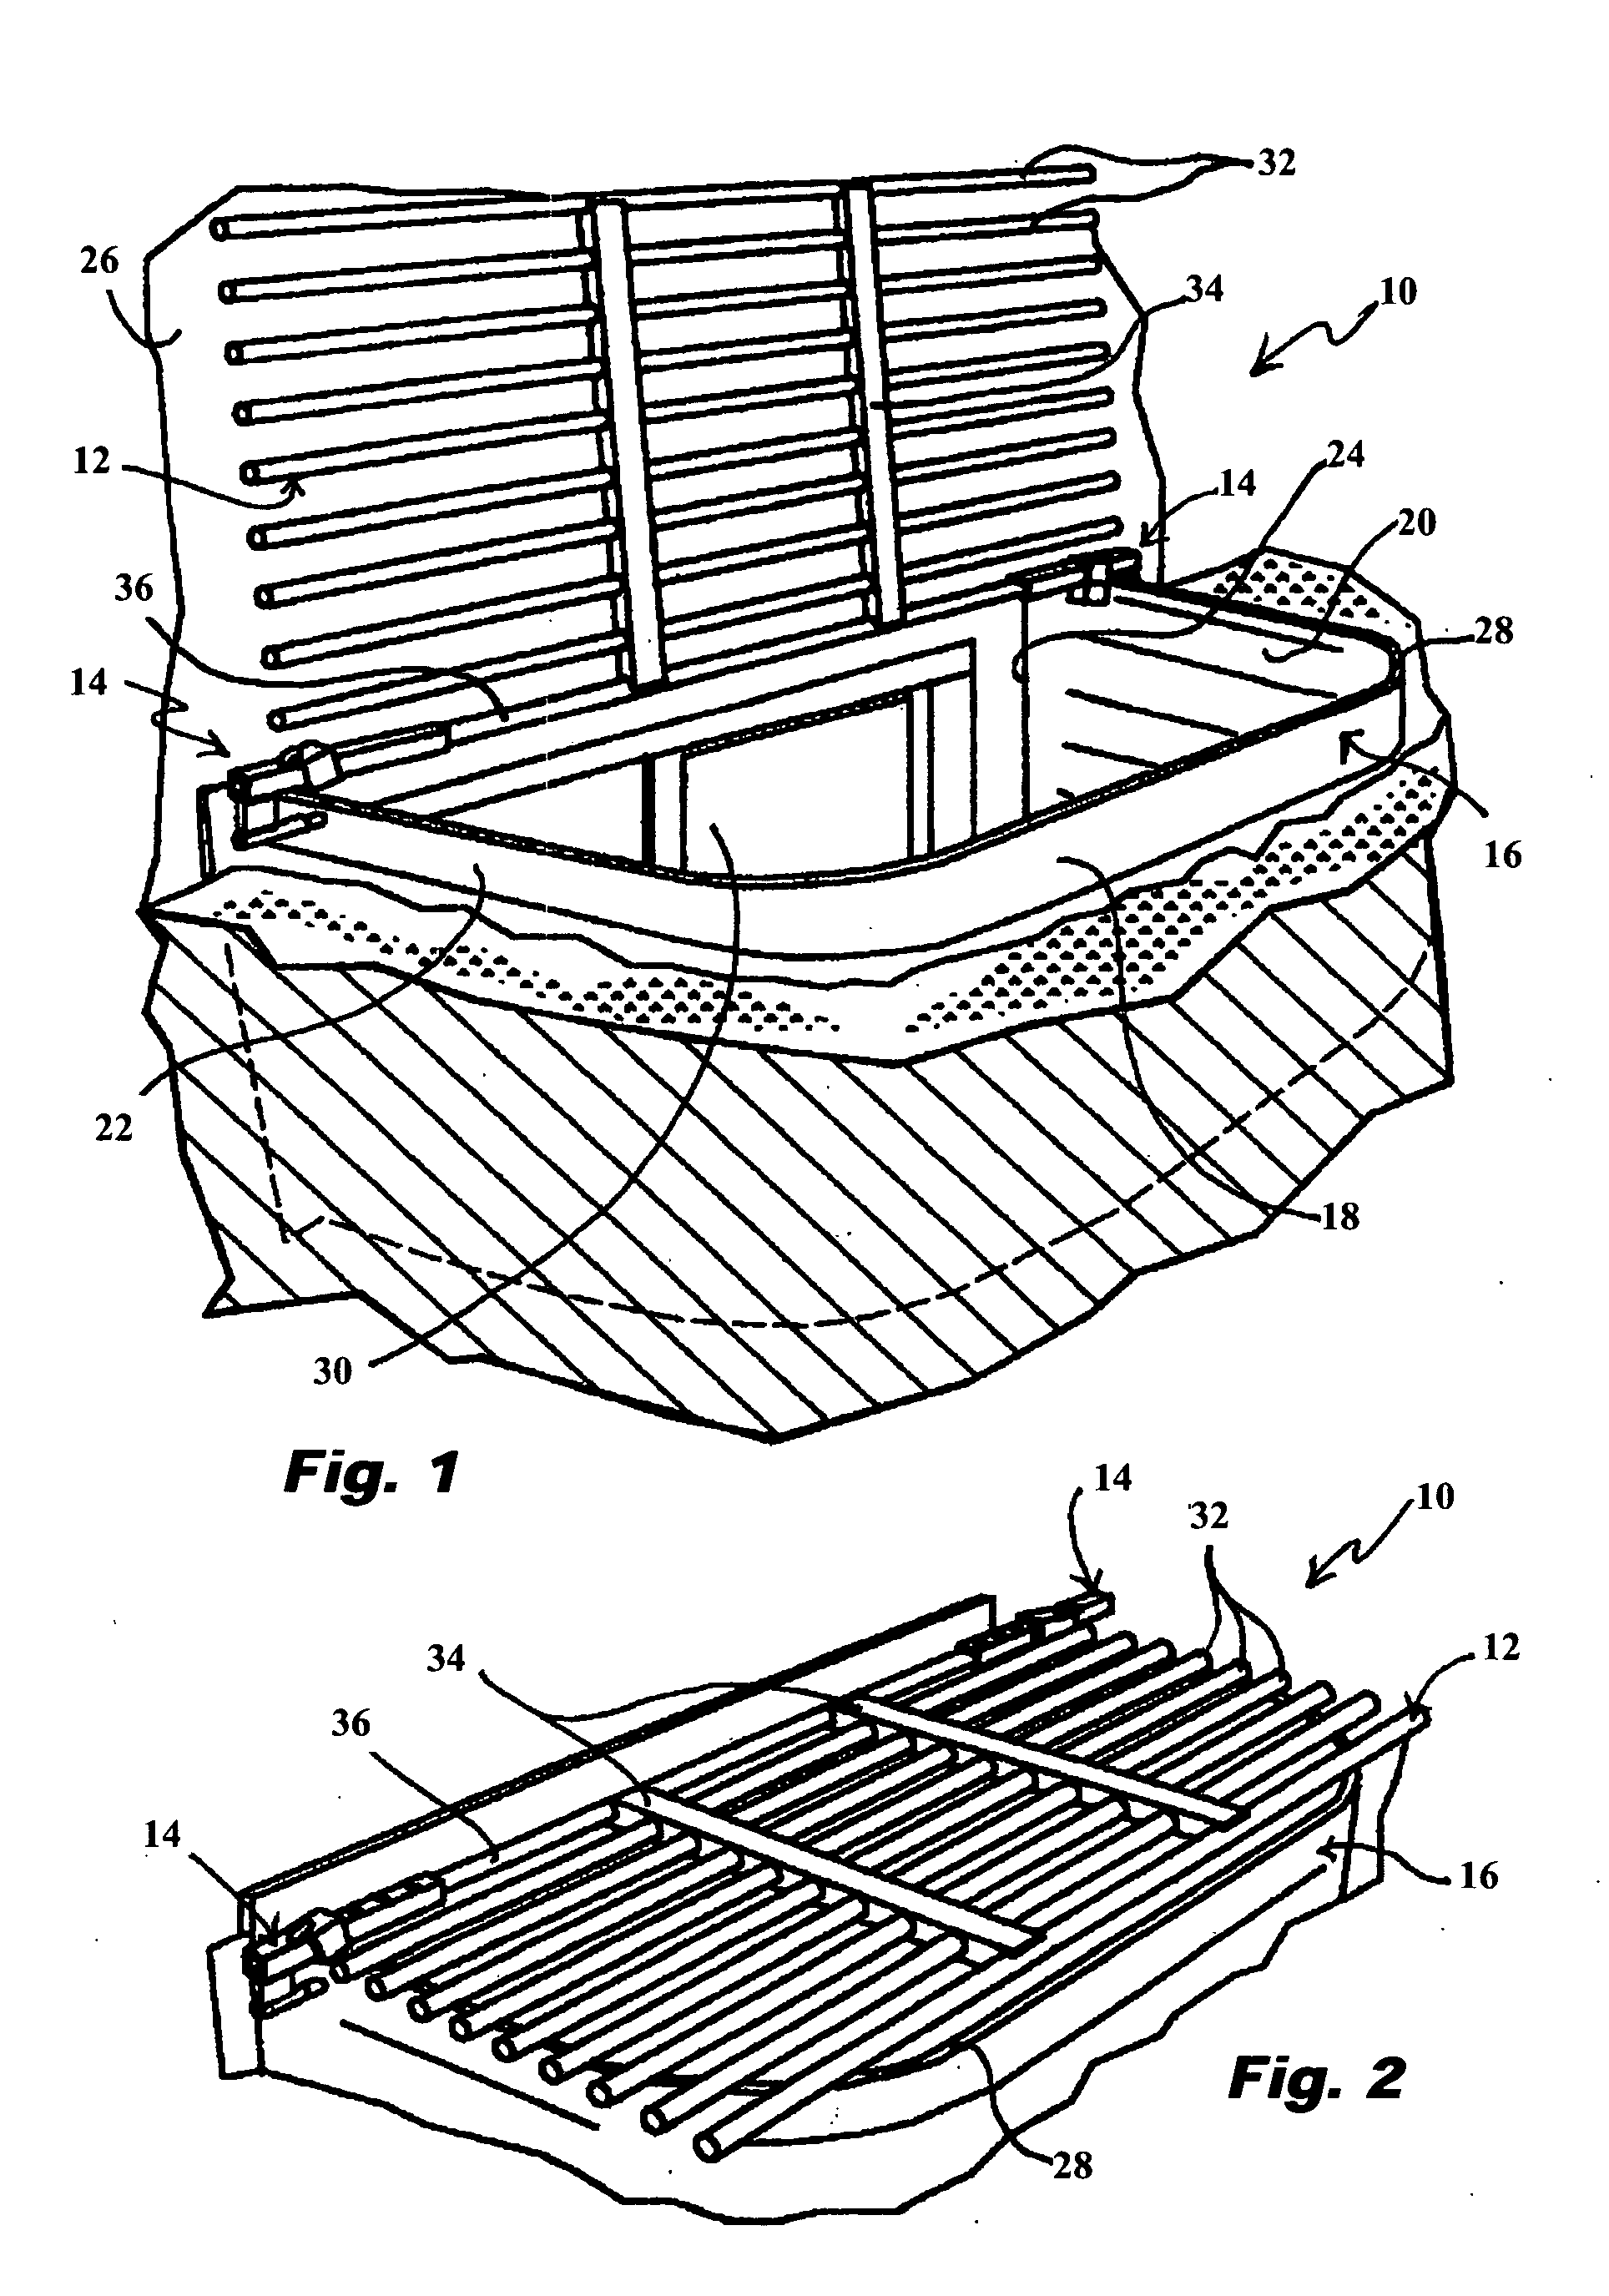 Window well covering system